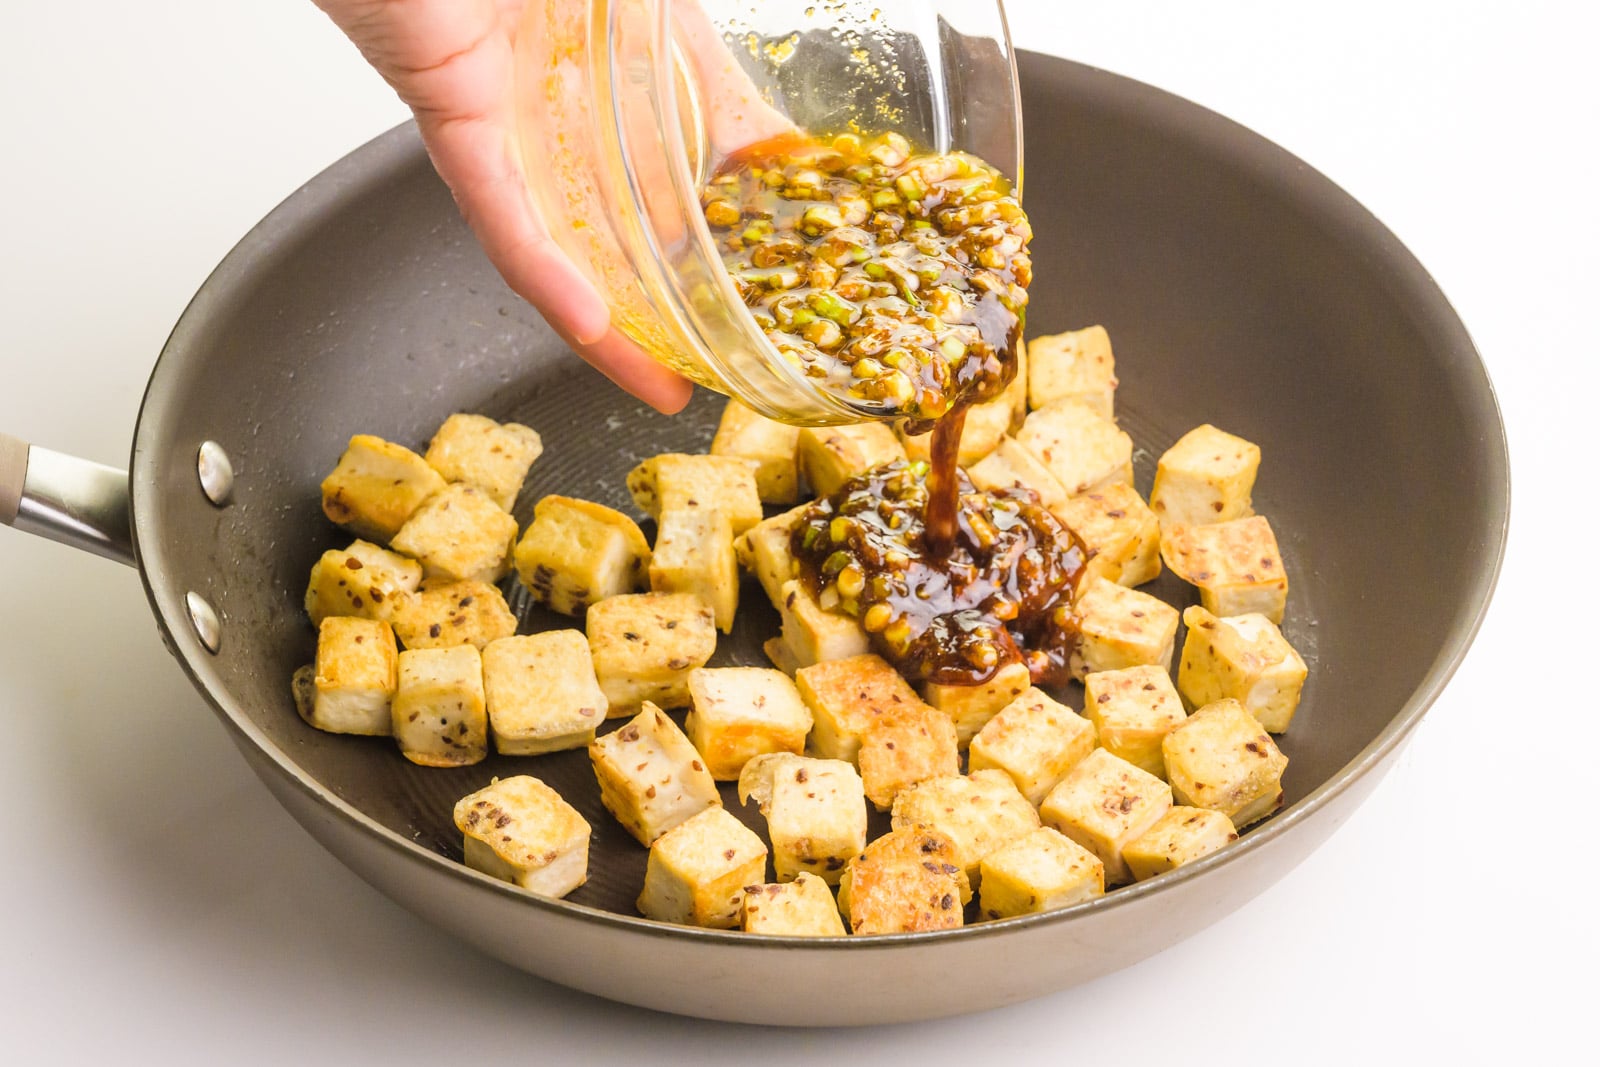 A hand holds a bowl of sauce and is pouring it into a skillet with tofu cubes.